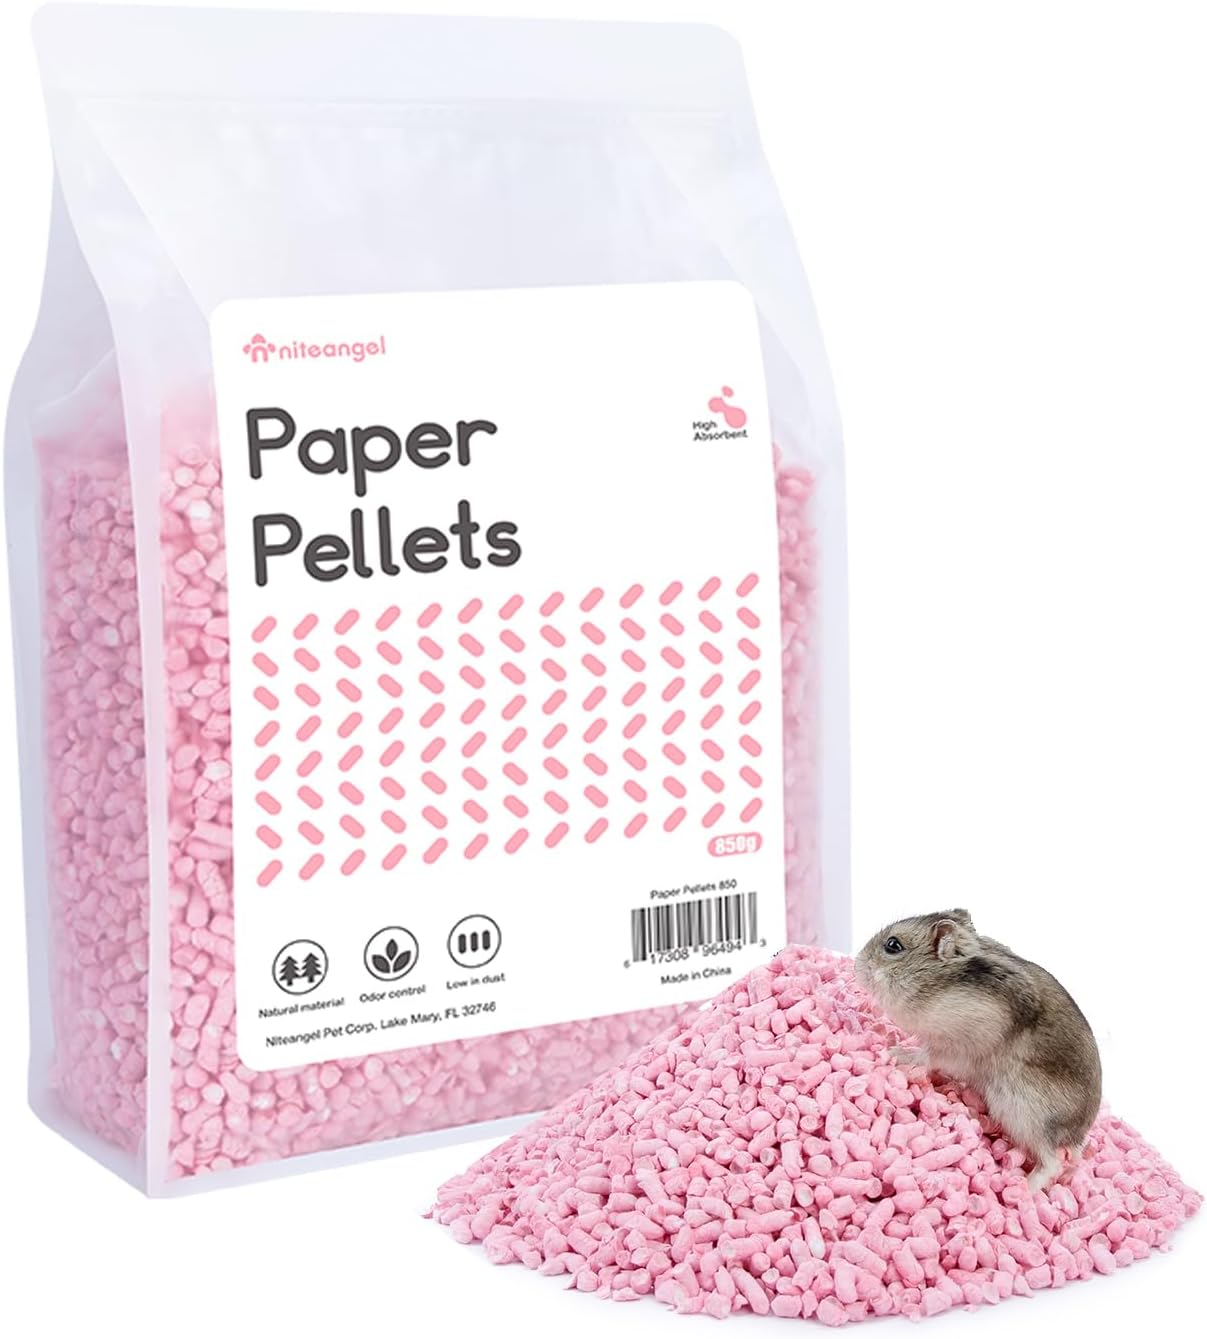 Niteangel Hamster Paper Pellets Bedding 1.8LB / 850g Small Aninam Bedding for Syrian Dwarf Hamsters Gerbils Mice Mouse Lemming Degus or Other Small-Sized Pets